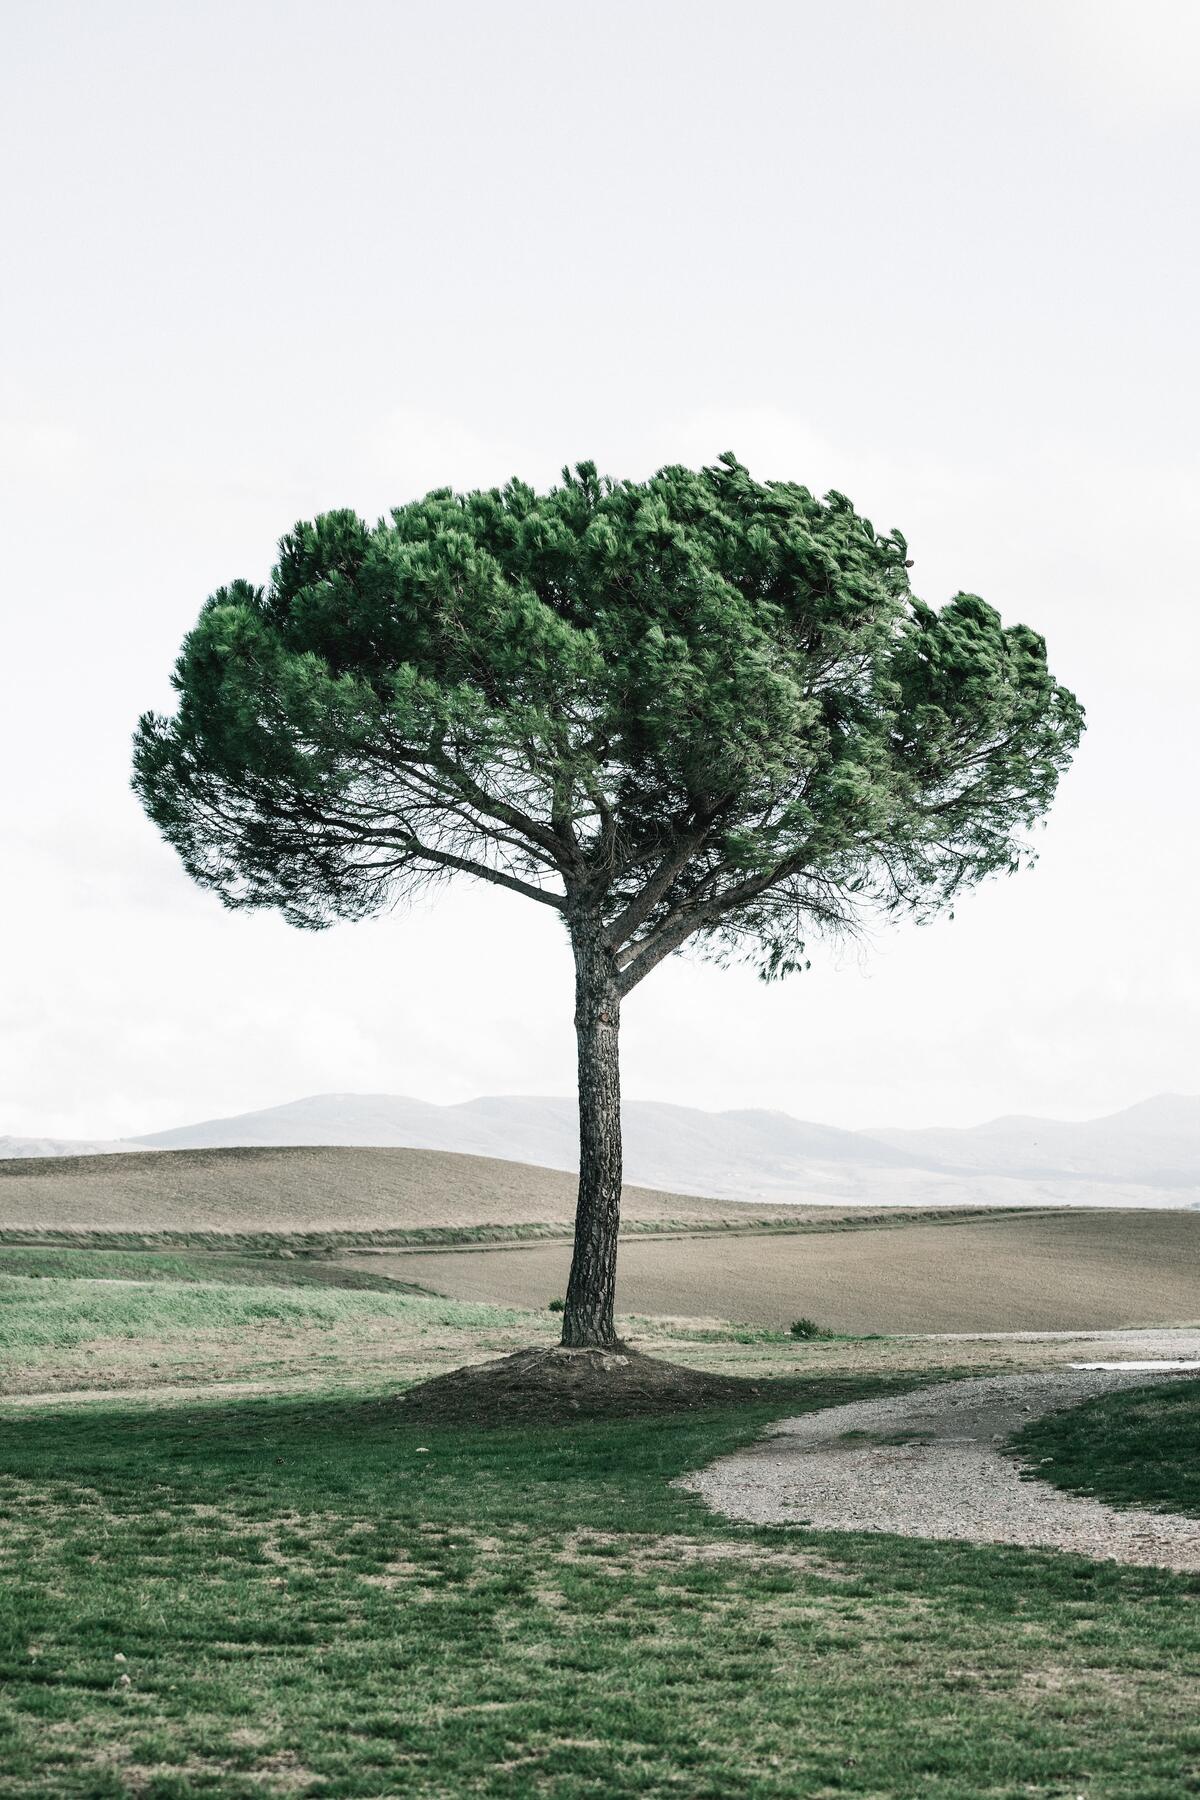 A lonely tree with a green crown